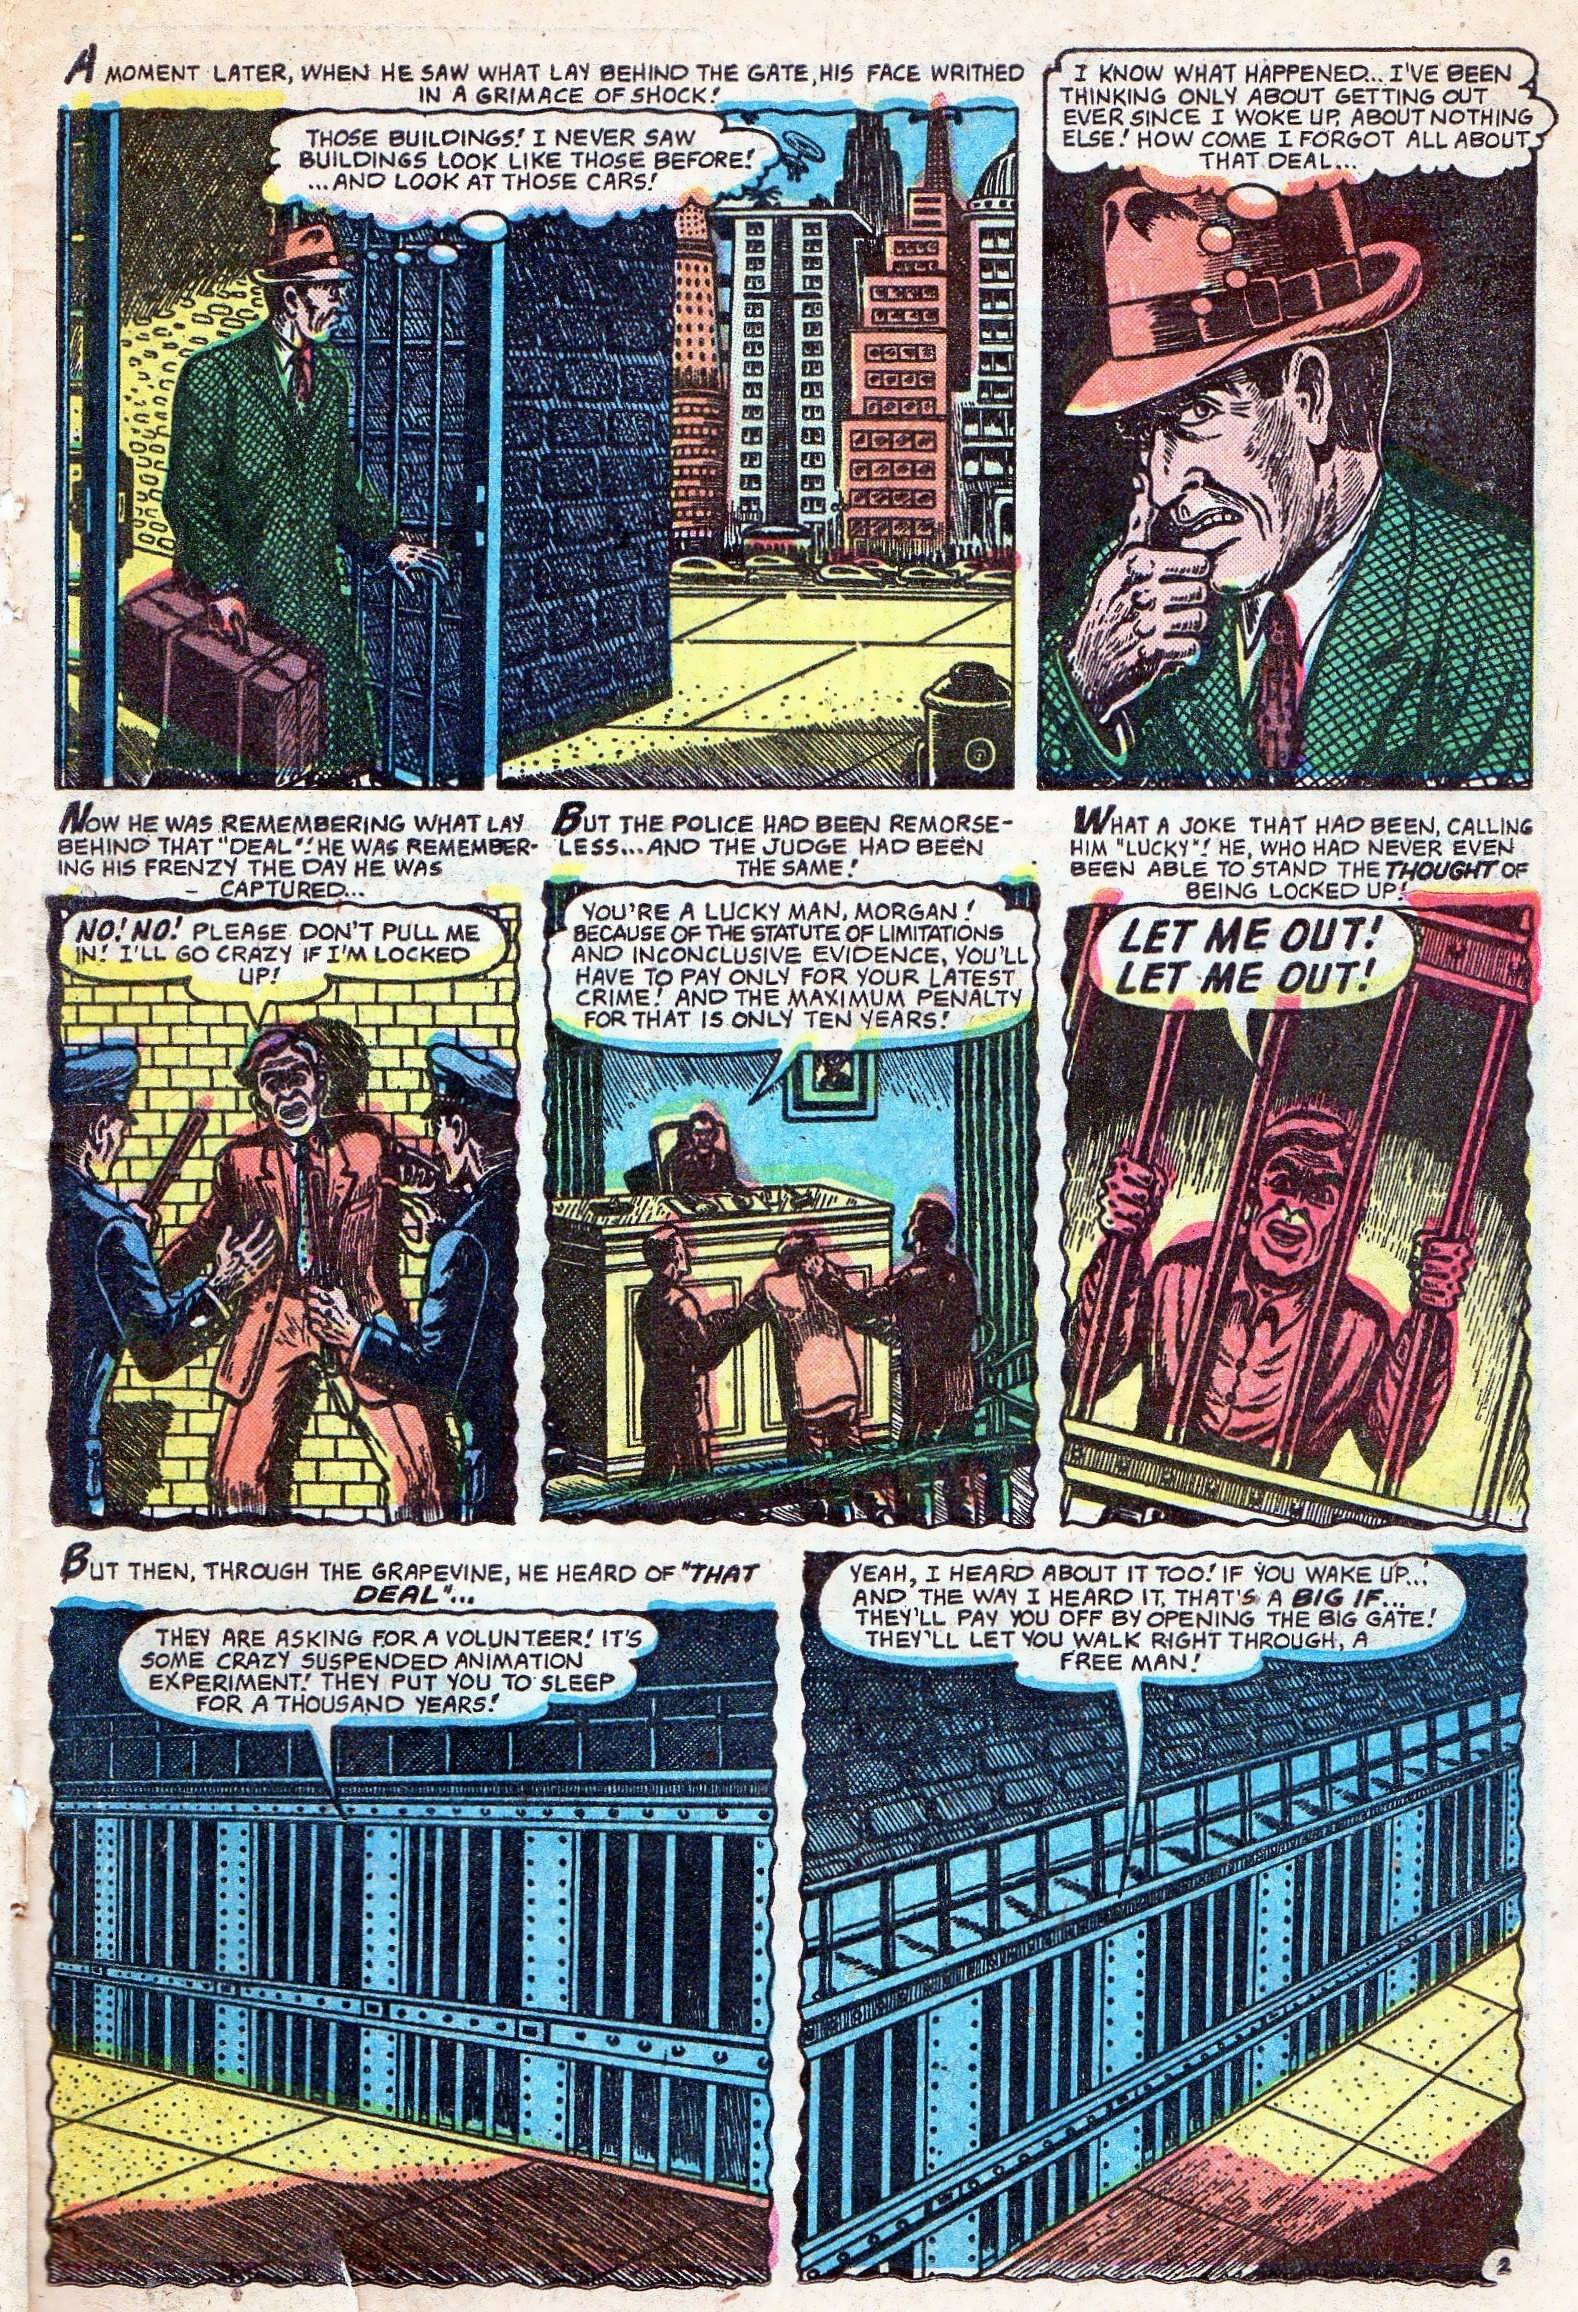 Marvel Tales (1949) 159 Page 24